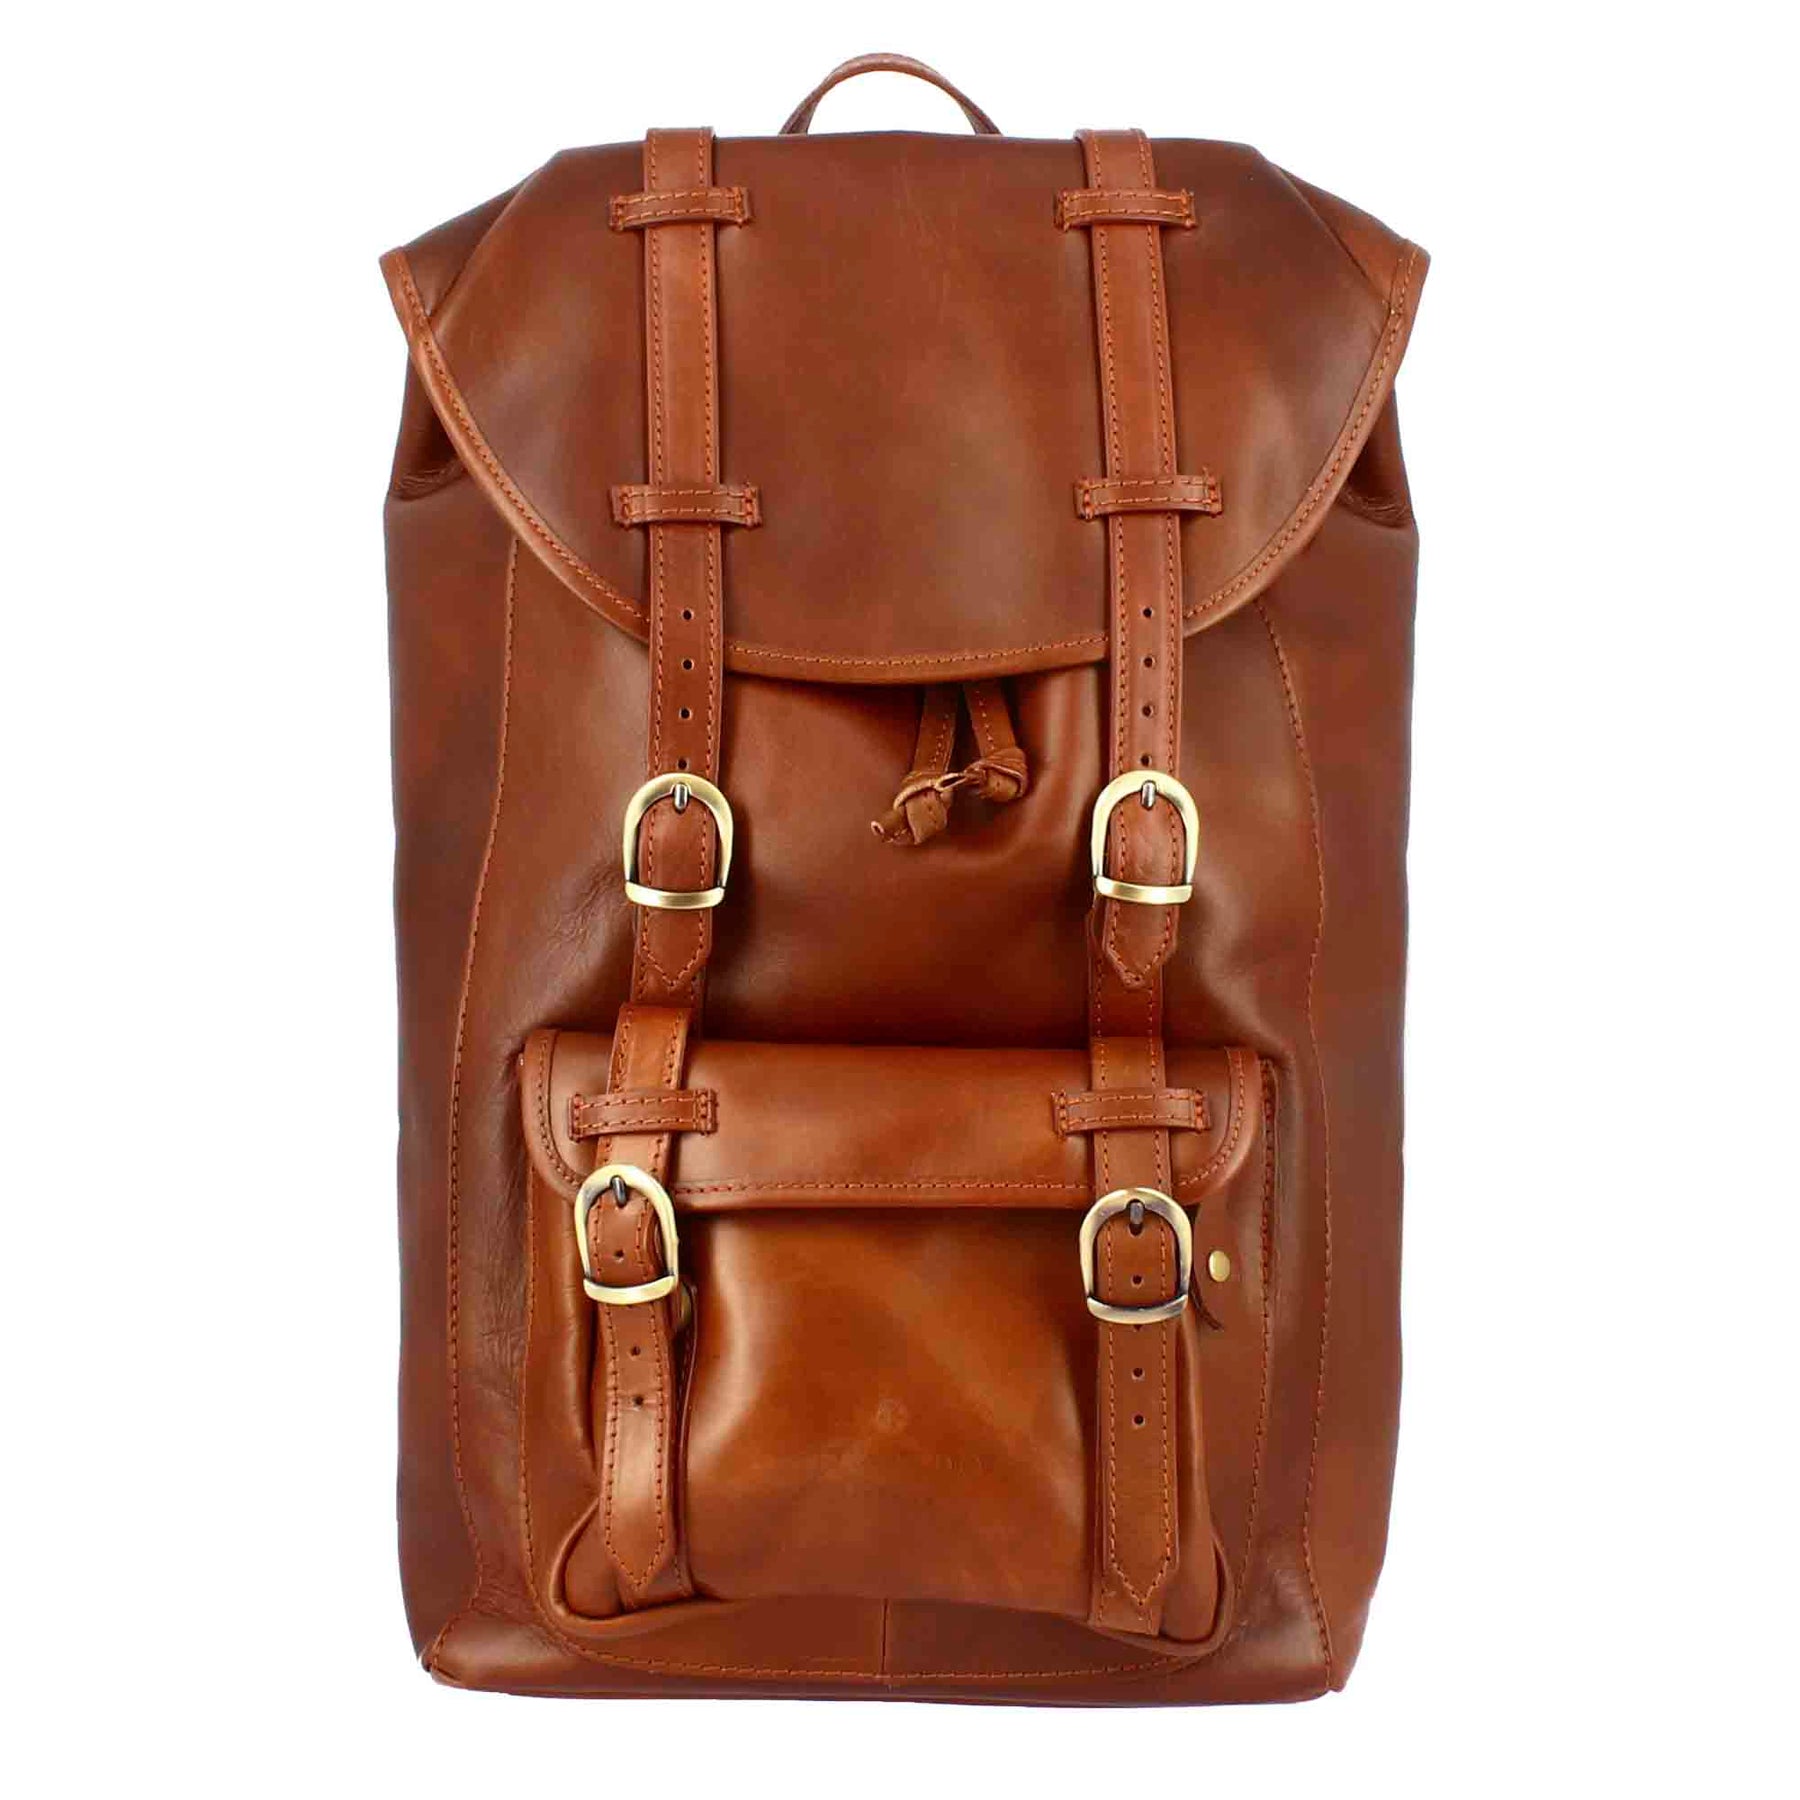 Brown leather travel backpack with buckles